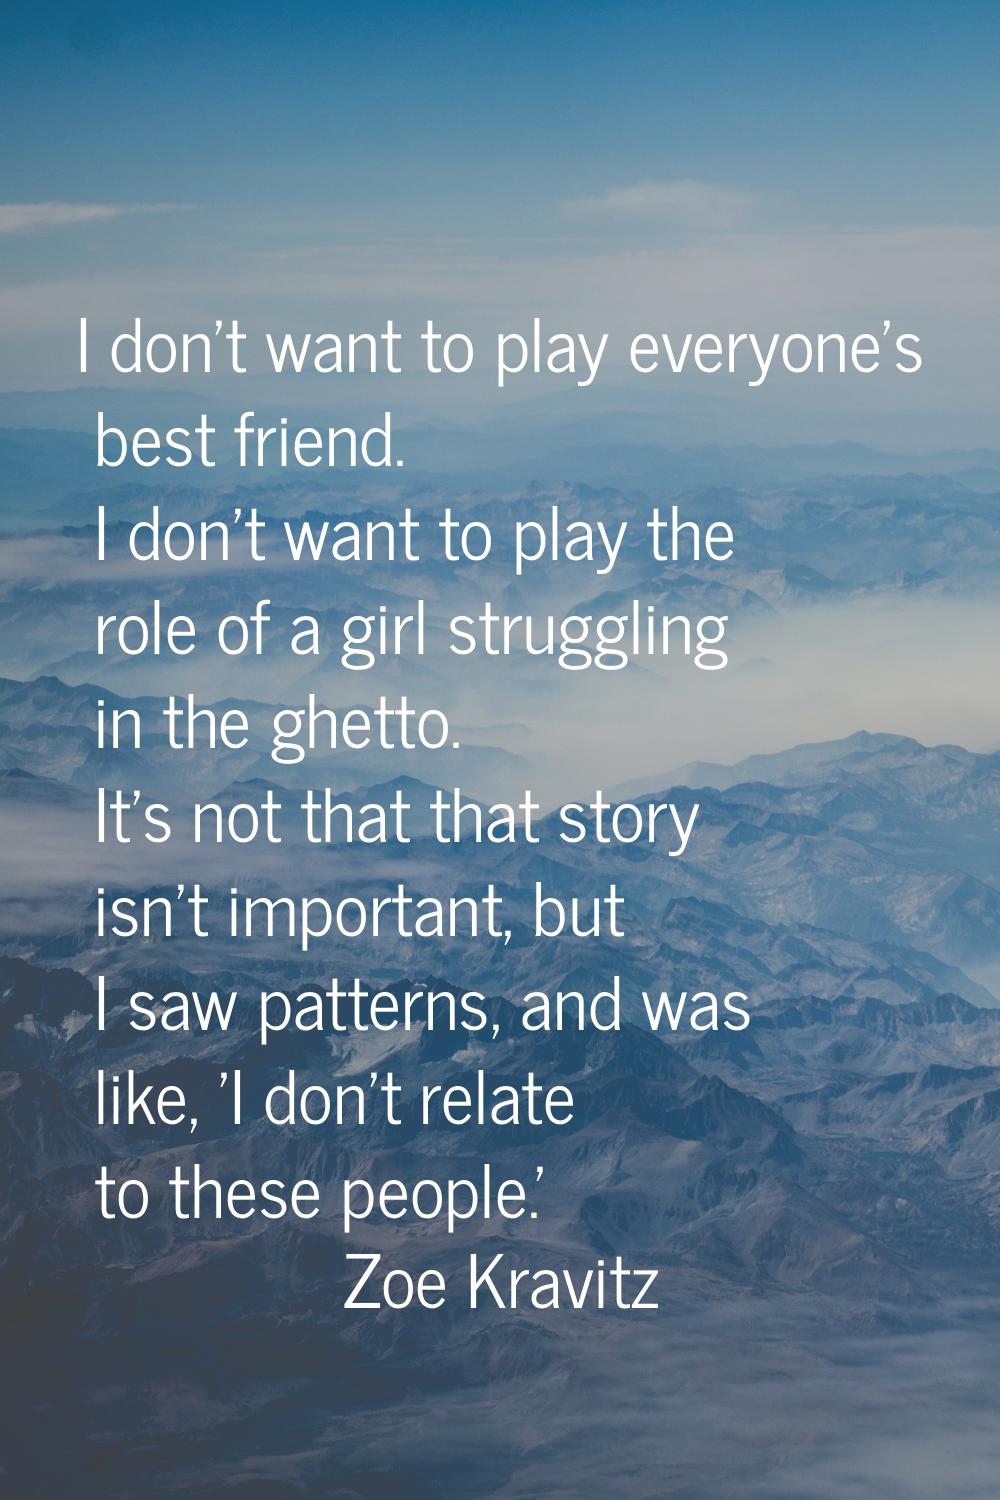 I don't want to play everyone's best friend. I don't want to play the role of a girl struggling in 